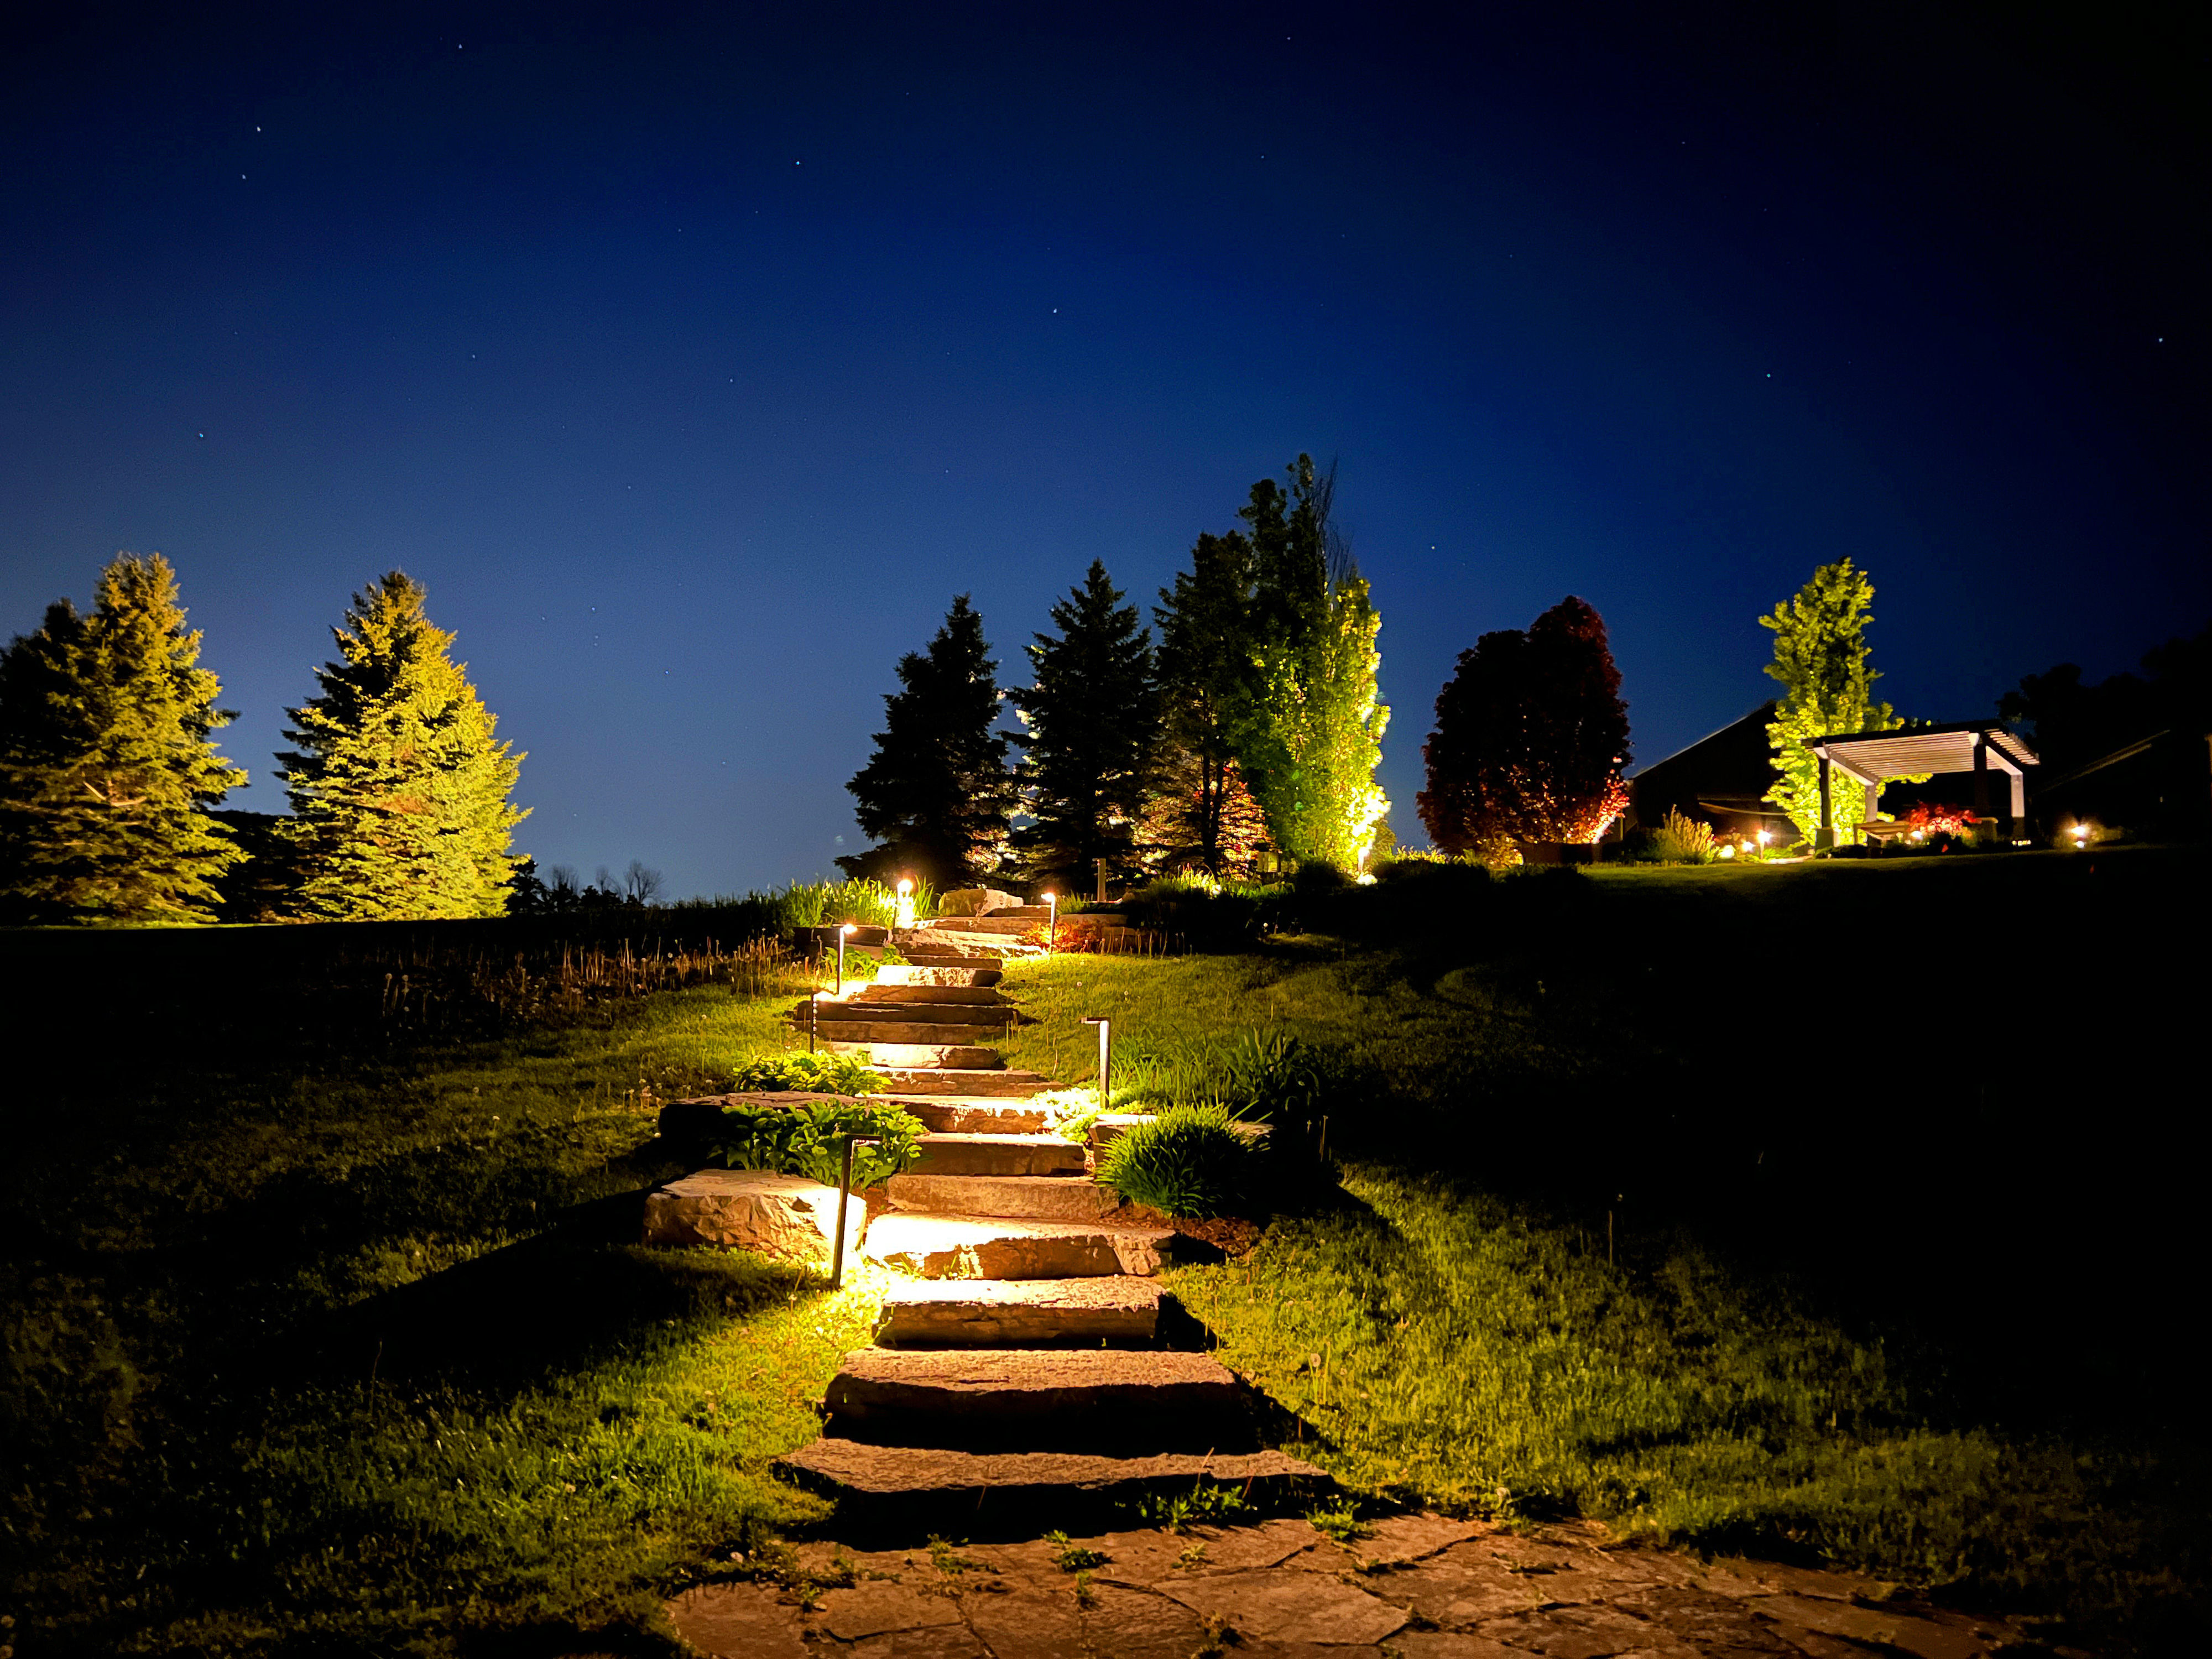 Pathway lighting during the nighttime